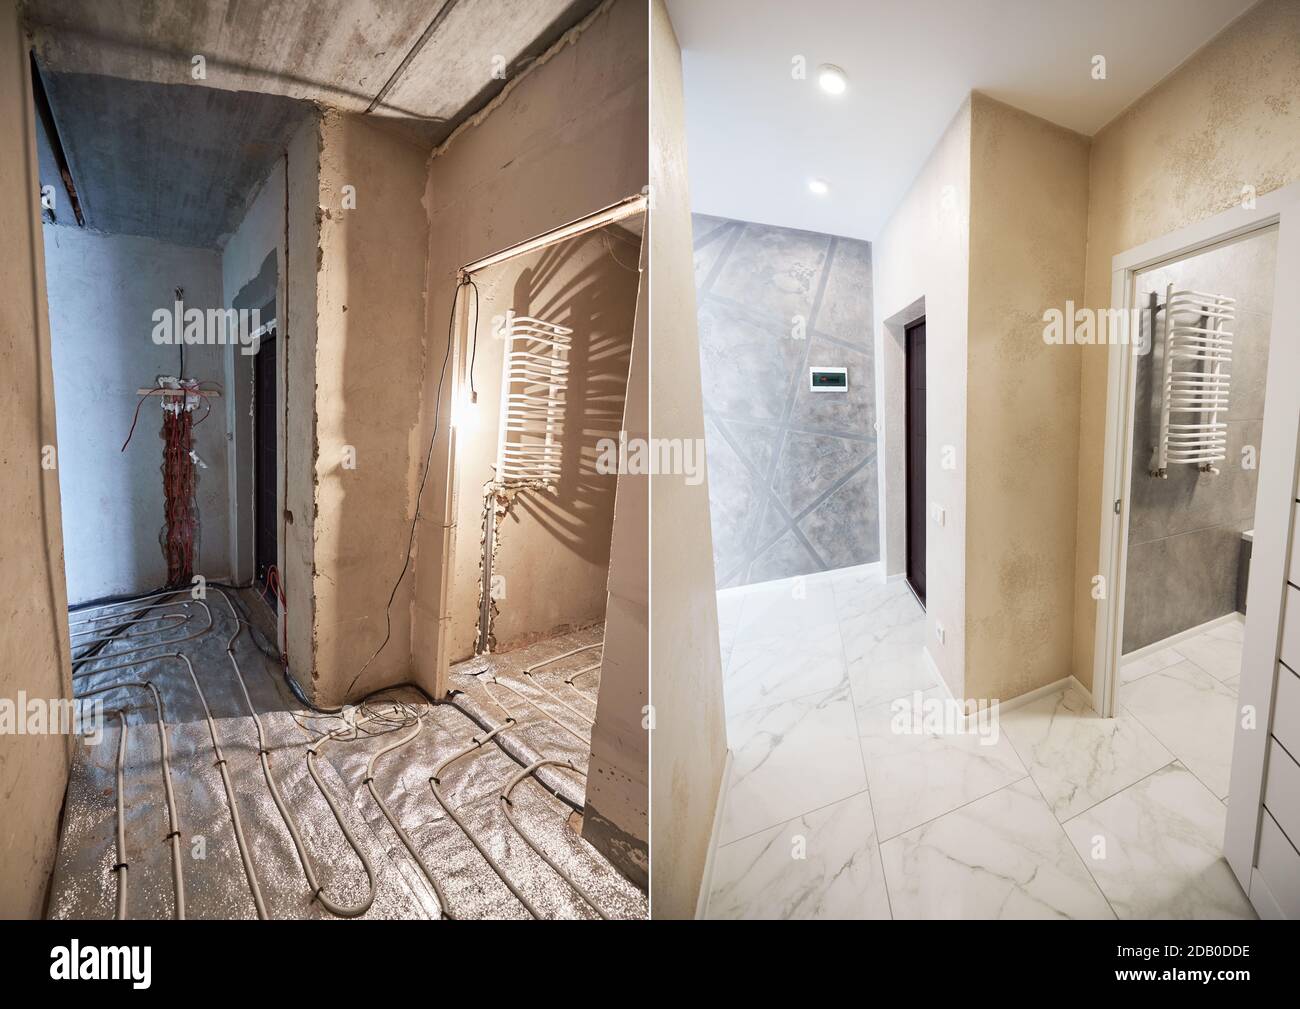 Modern apartment with marble floor before and after refurbishment. Comparison of old flat with underfloor heating pipes and new place with heated towel rail and stylish design. Concept of restoration. Stock Photo